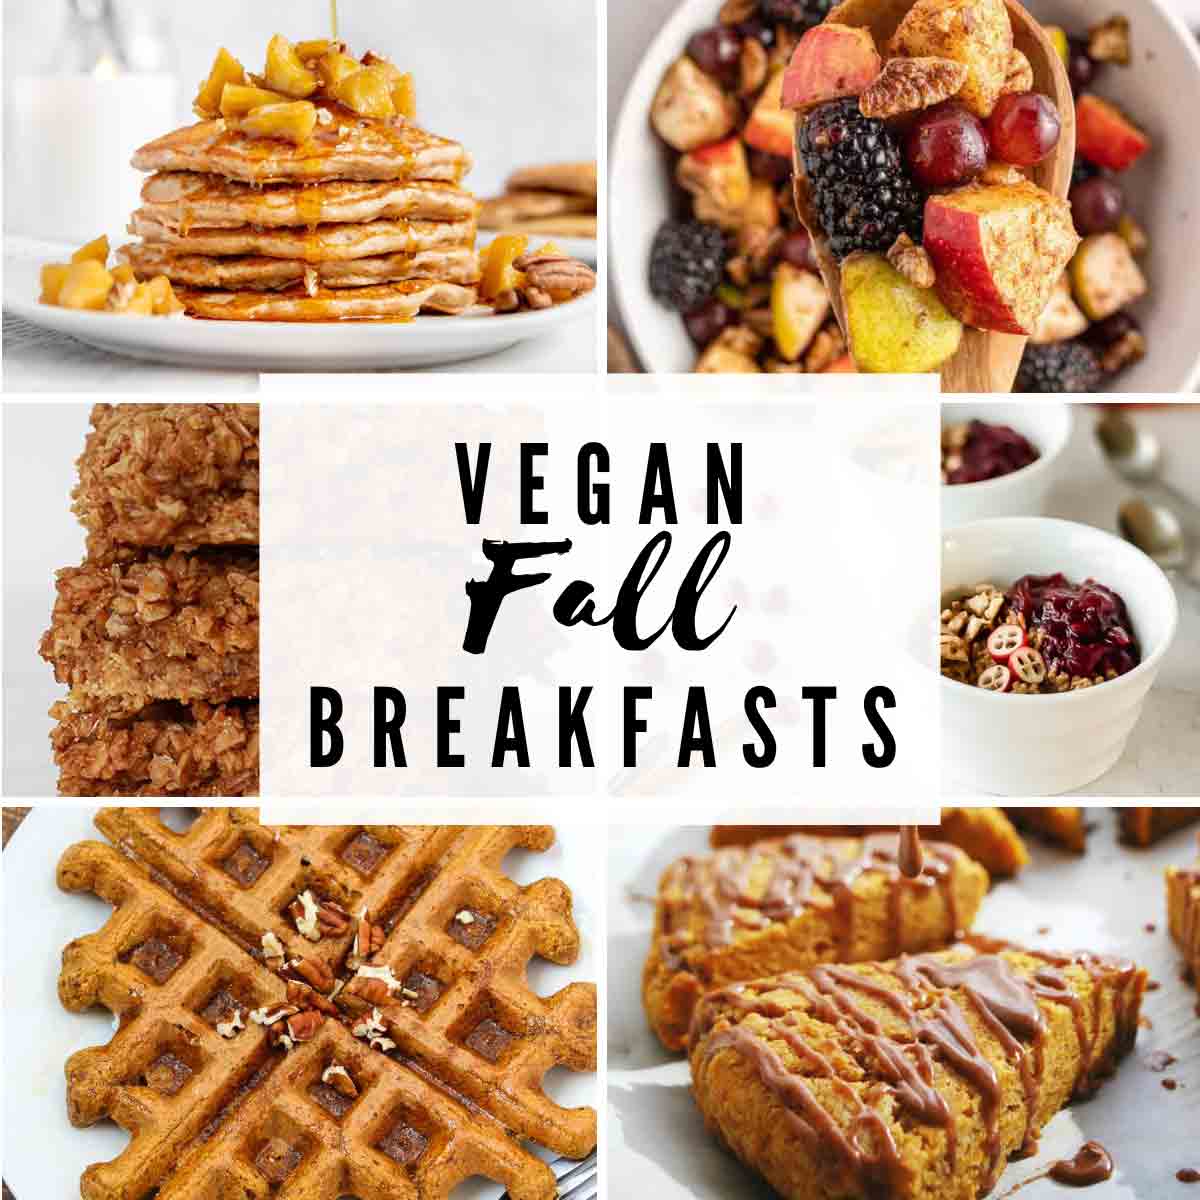 Image Collage With Text Overlay That Reads 'vegan Fall Breakfasts'